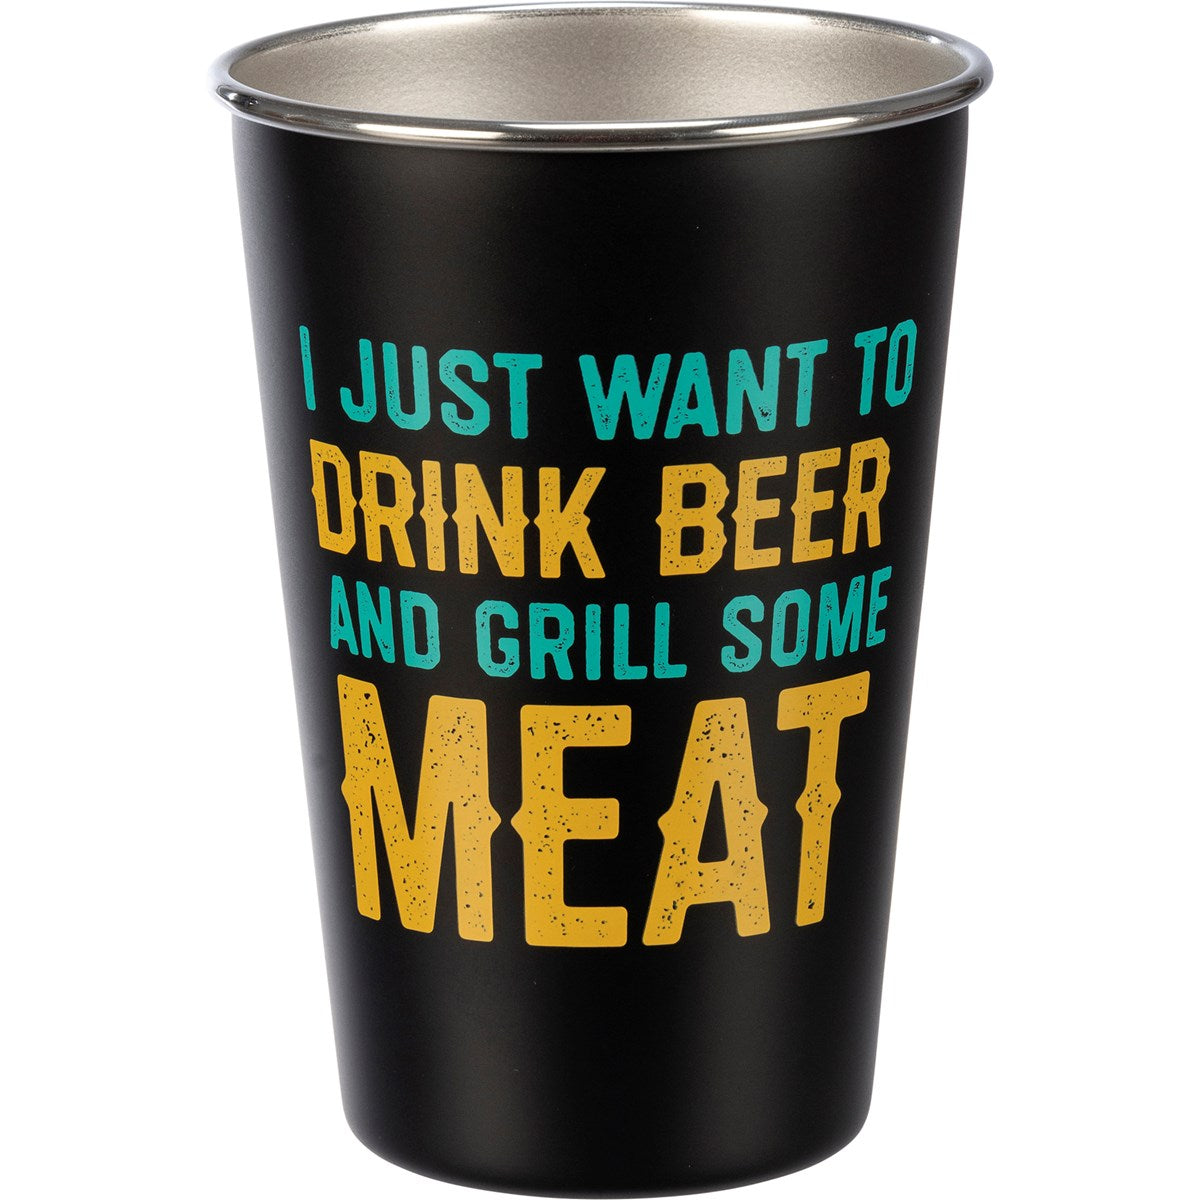 "I JUST WANT TO DRINK BEER AND GRILL SOME MEAT" BEER PINT GLASS